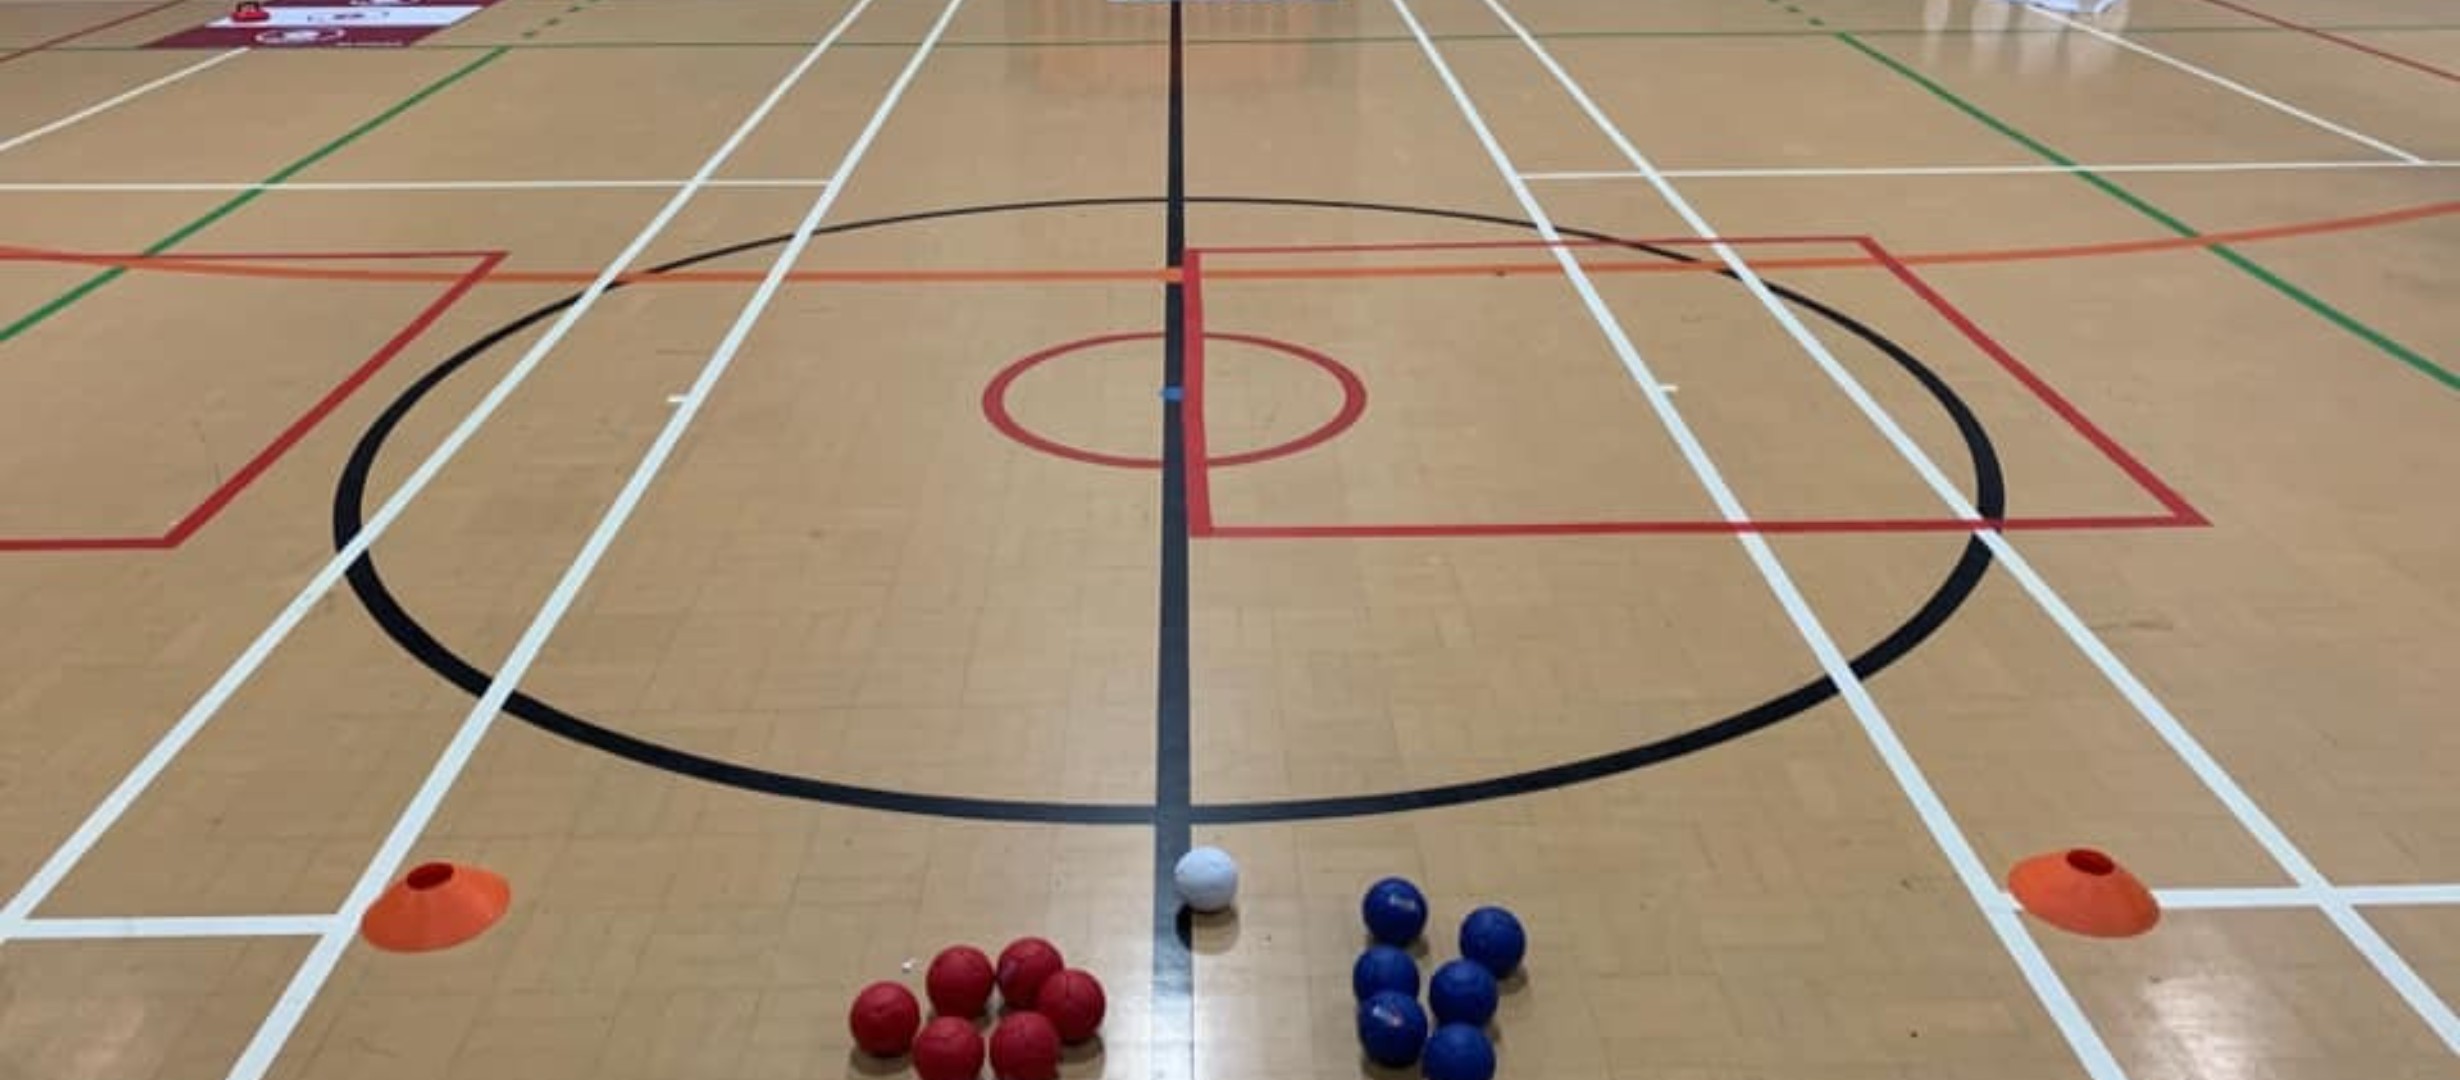 photo of sports hall floor with boccia balls and cones